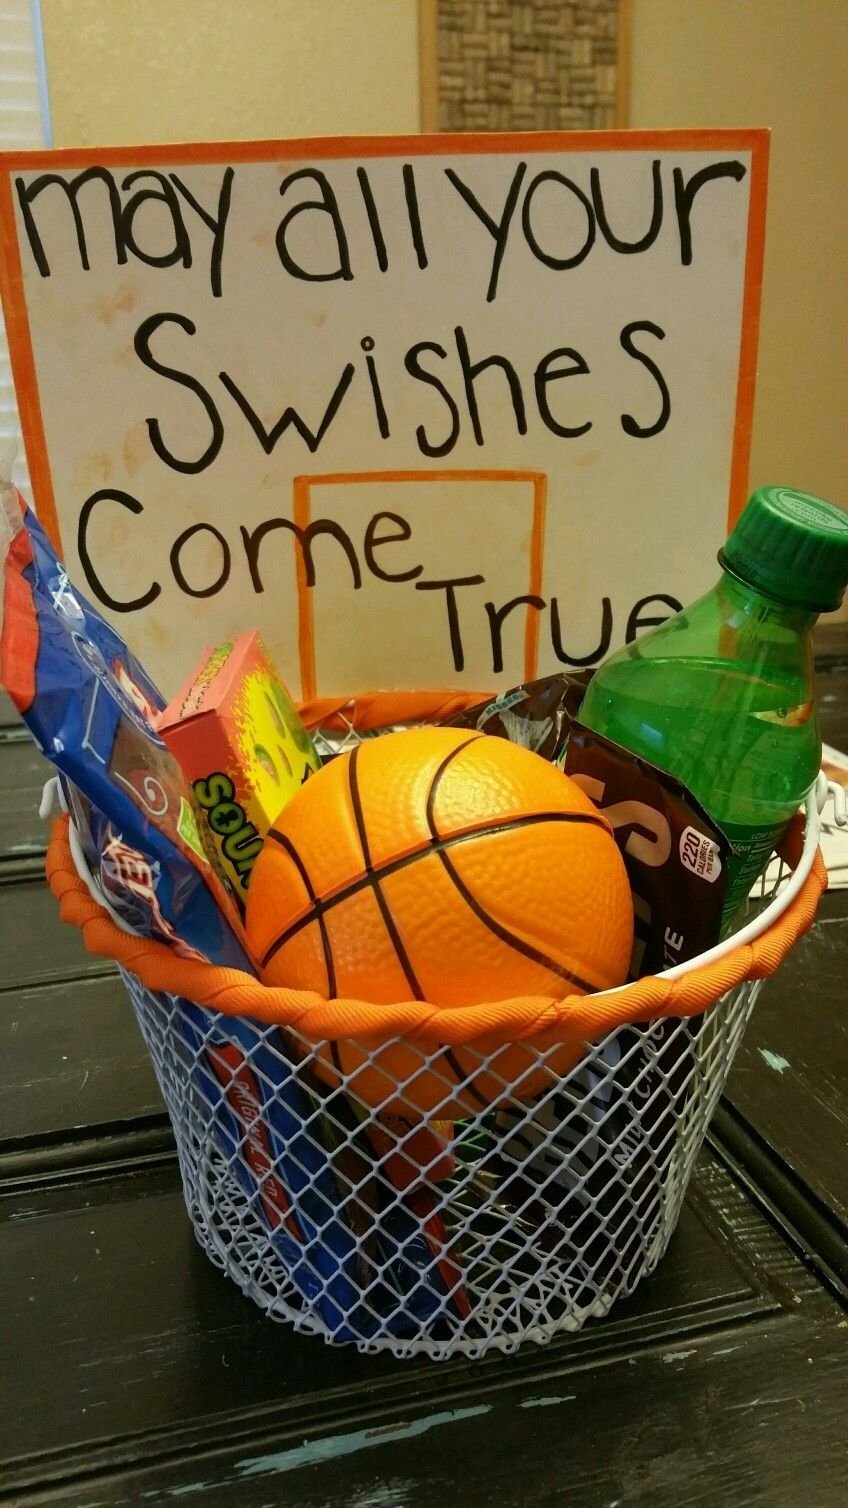 10 Attractive Gift Ideas For Basketball Coach may all your swishes come true basketball gift basket we found 2022